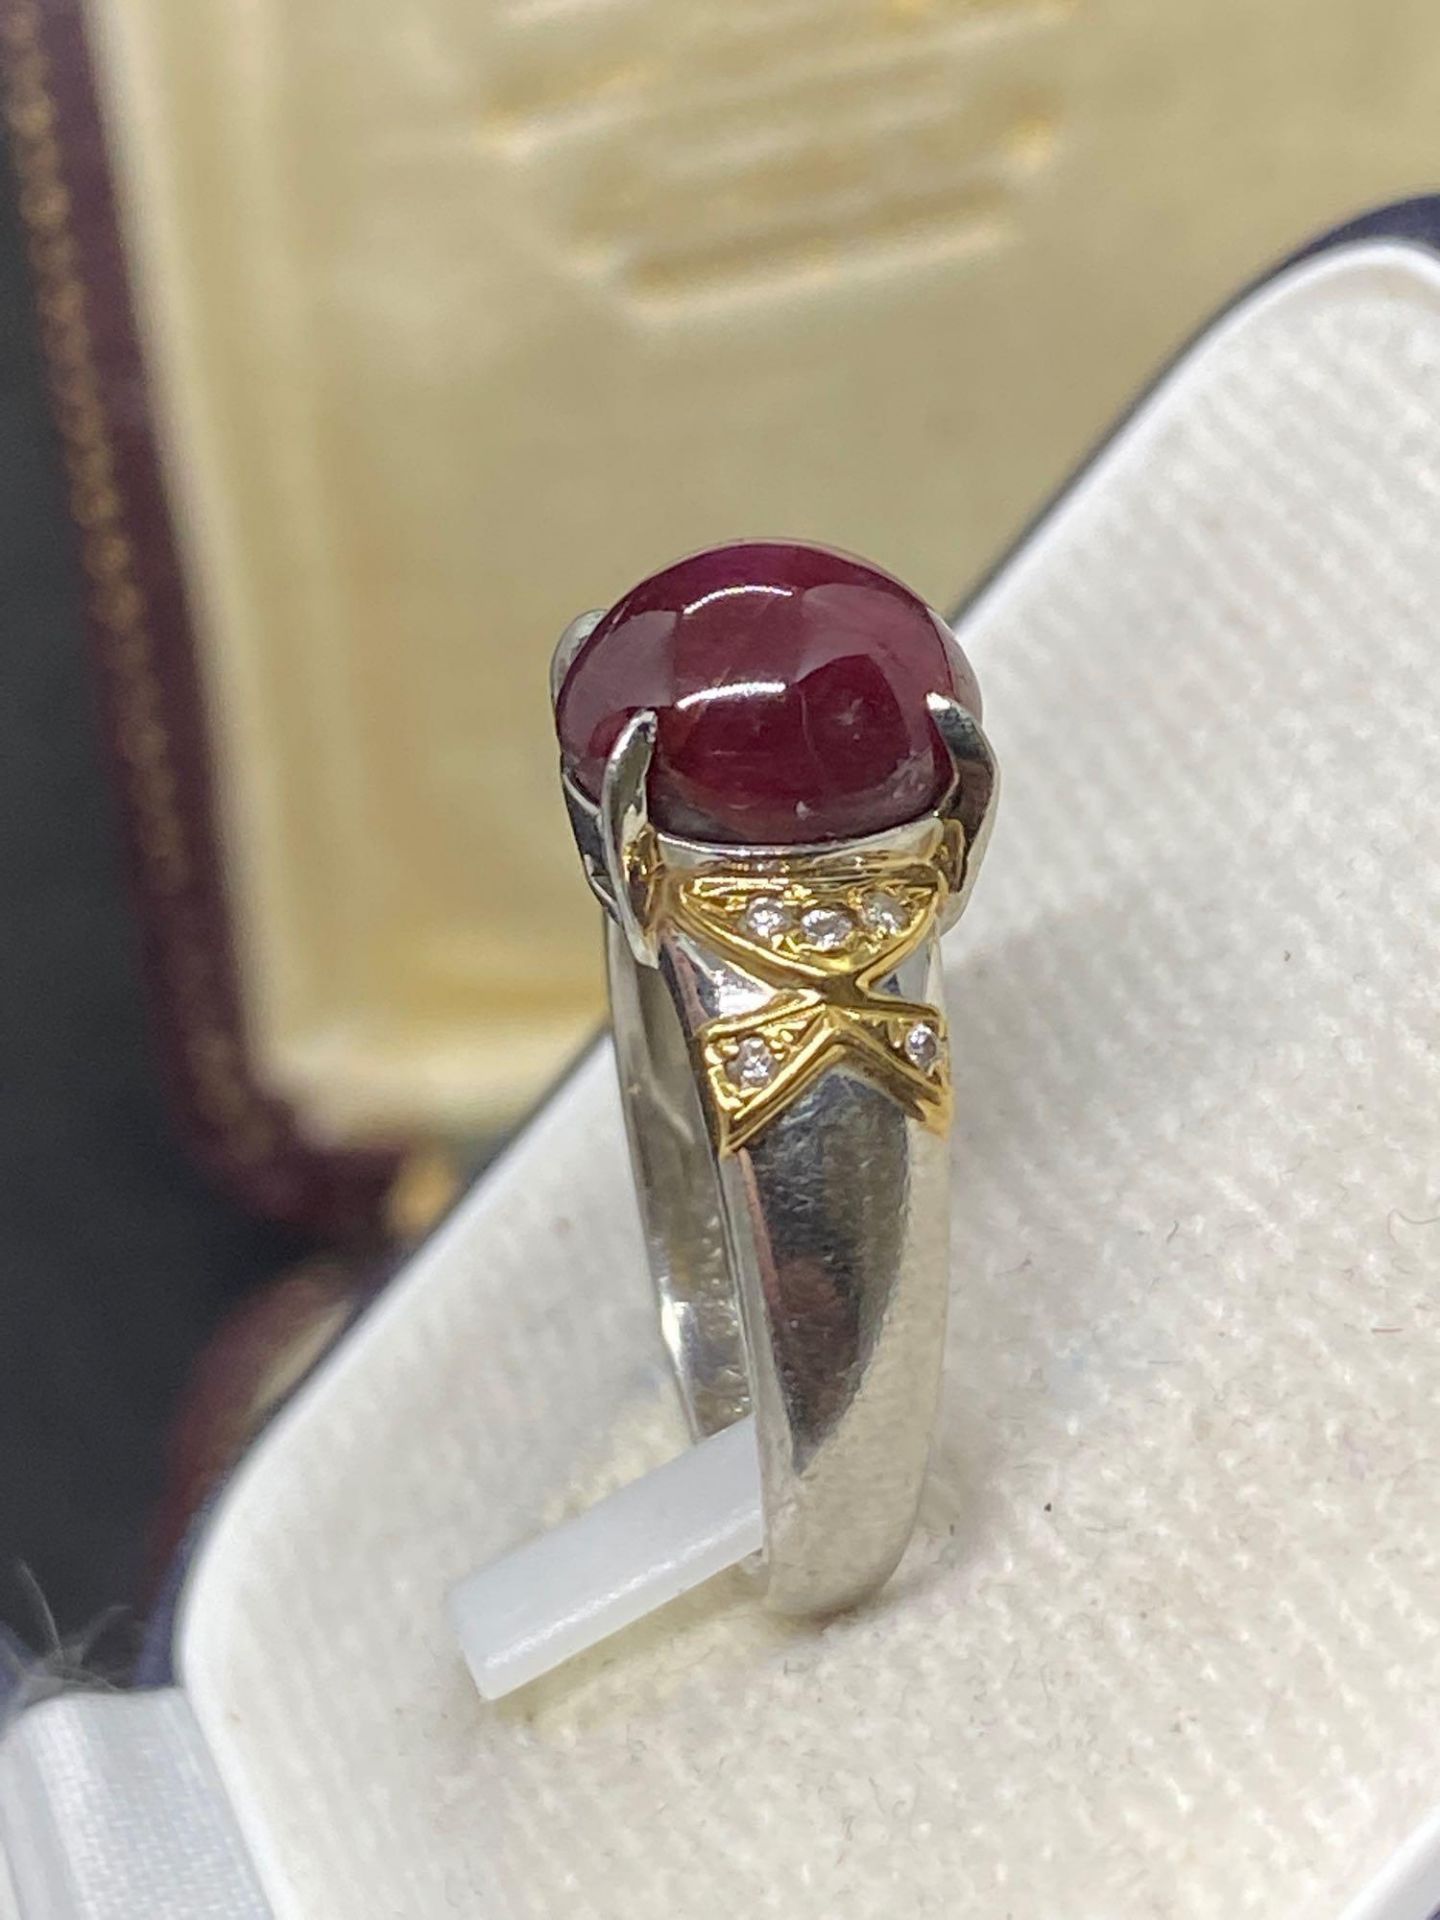 Platinum & 18ct Gold 3.00ct Star Ruby & Diamond Ring - 6.7 Grams - Approx Size L - Image 2 of 3